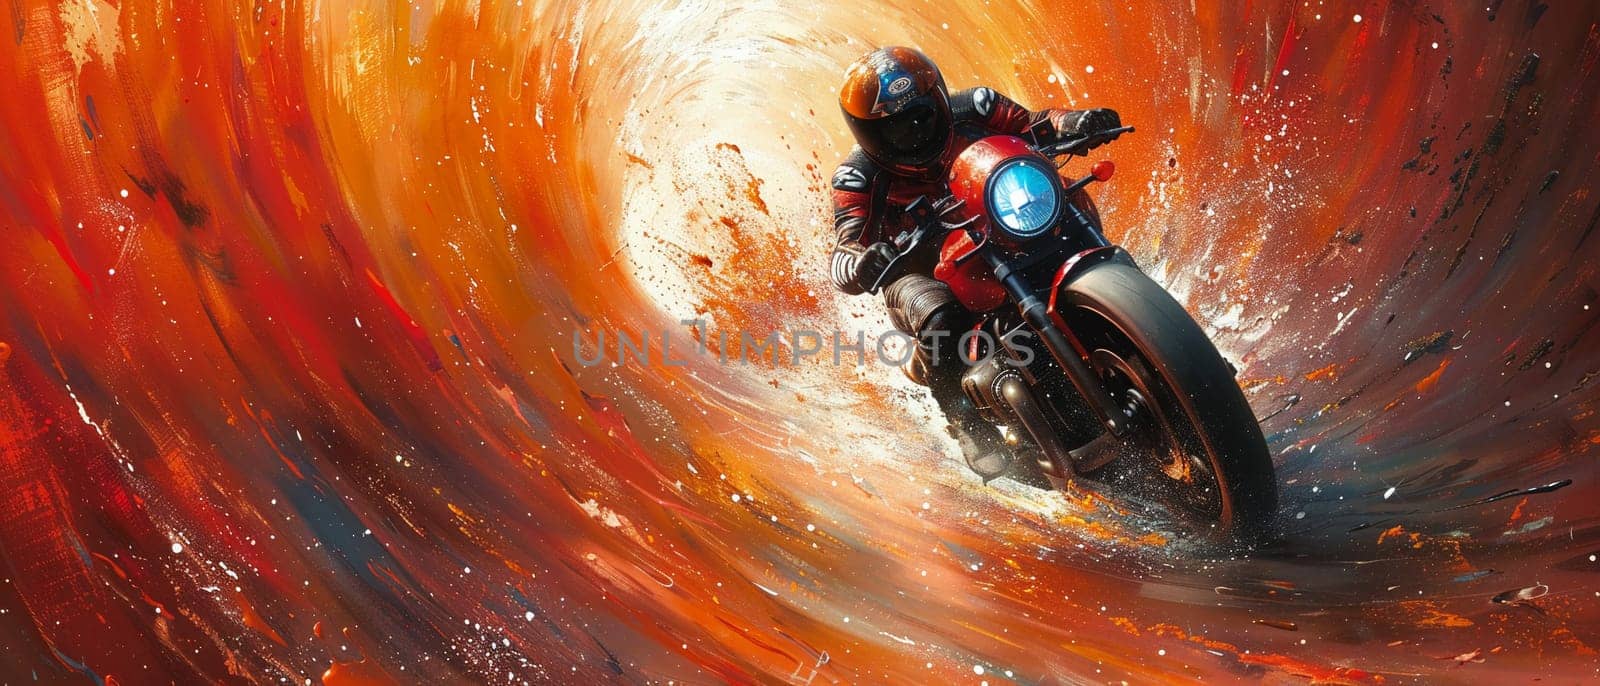 Tunnel speed rider scene painted with a sense of motion and abstract color splashes. by Benzoix